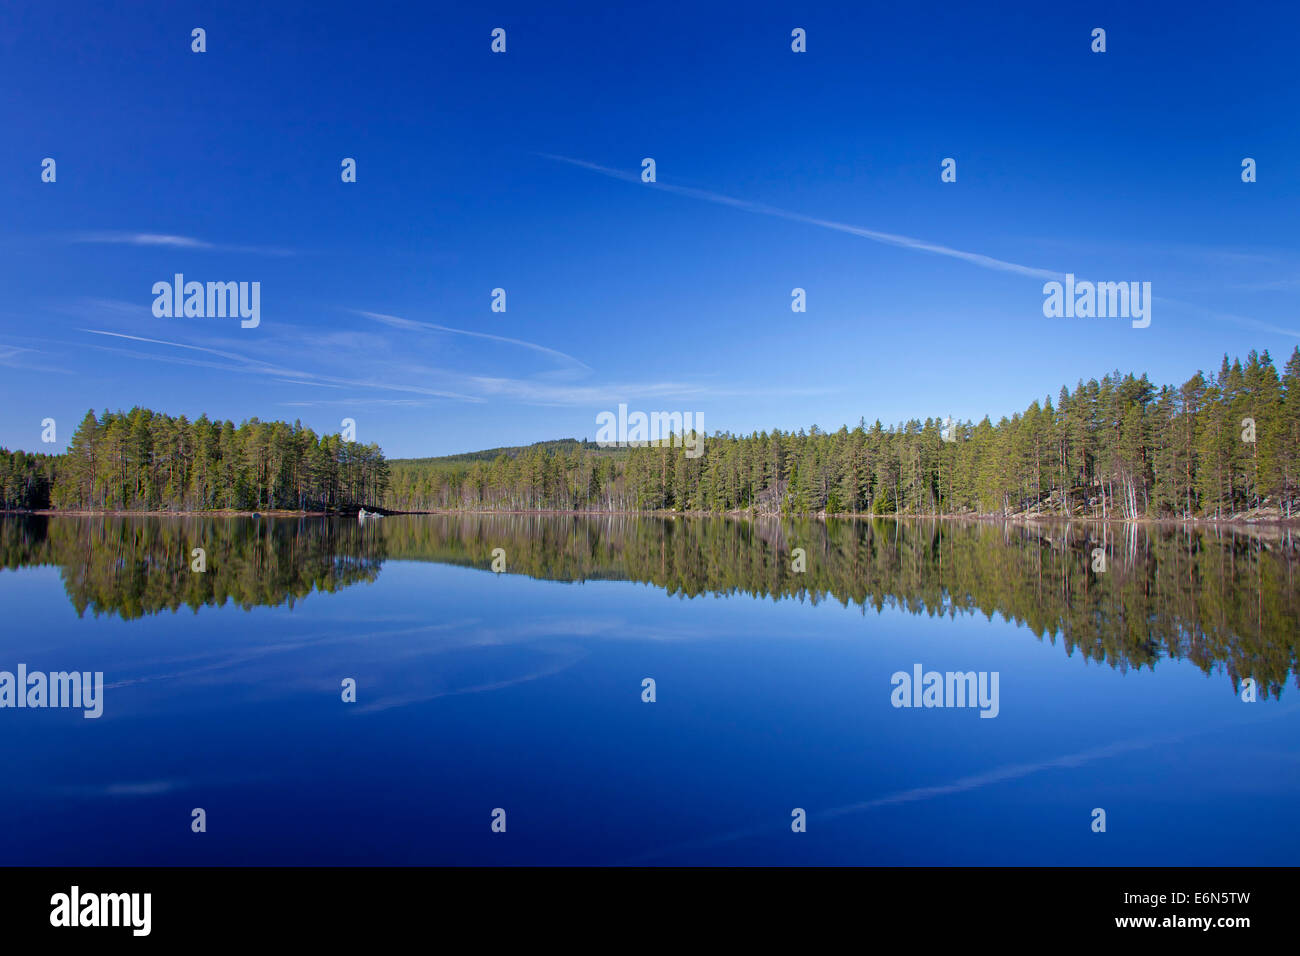 Forest with spruce trees along lake Gryssen in spring, Dalarna, Sweden, Scandinavia Stock Photo